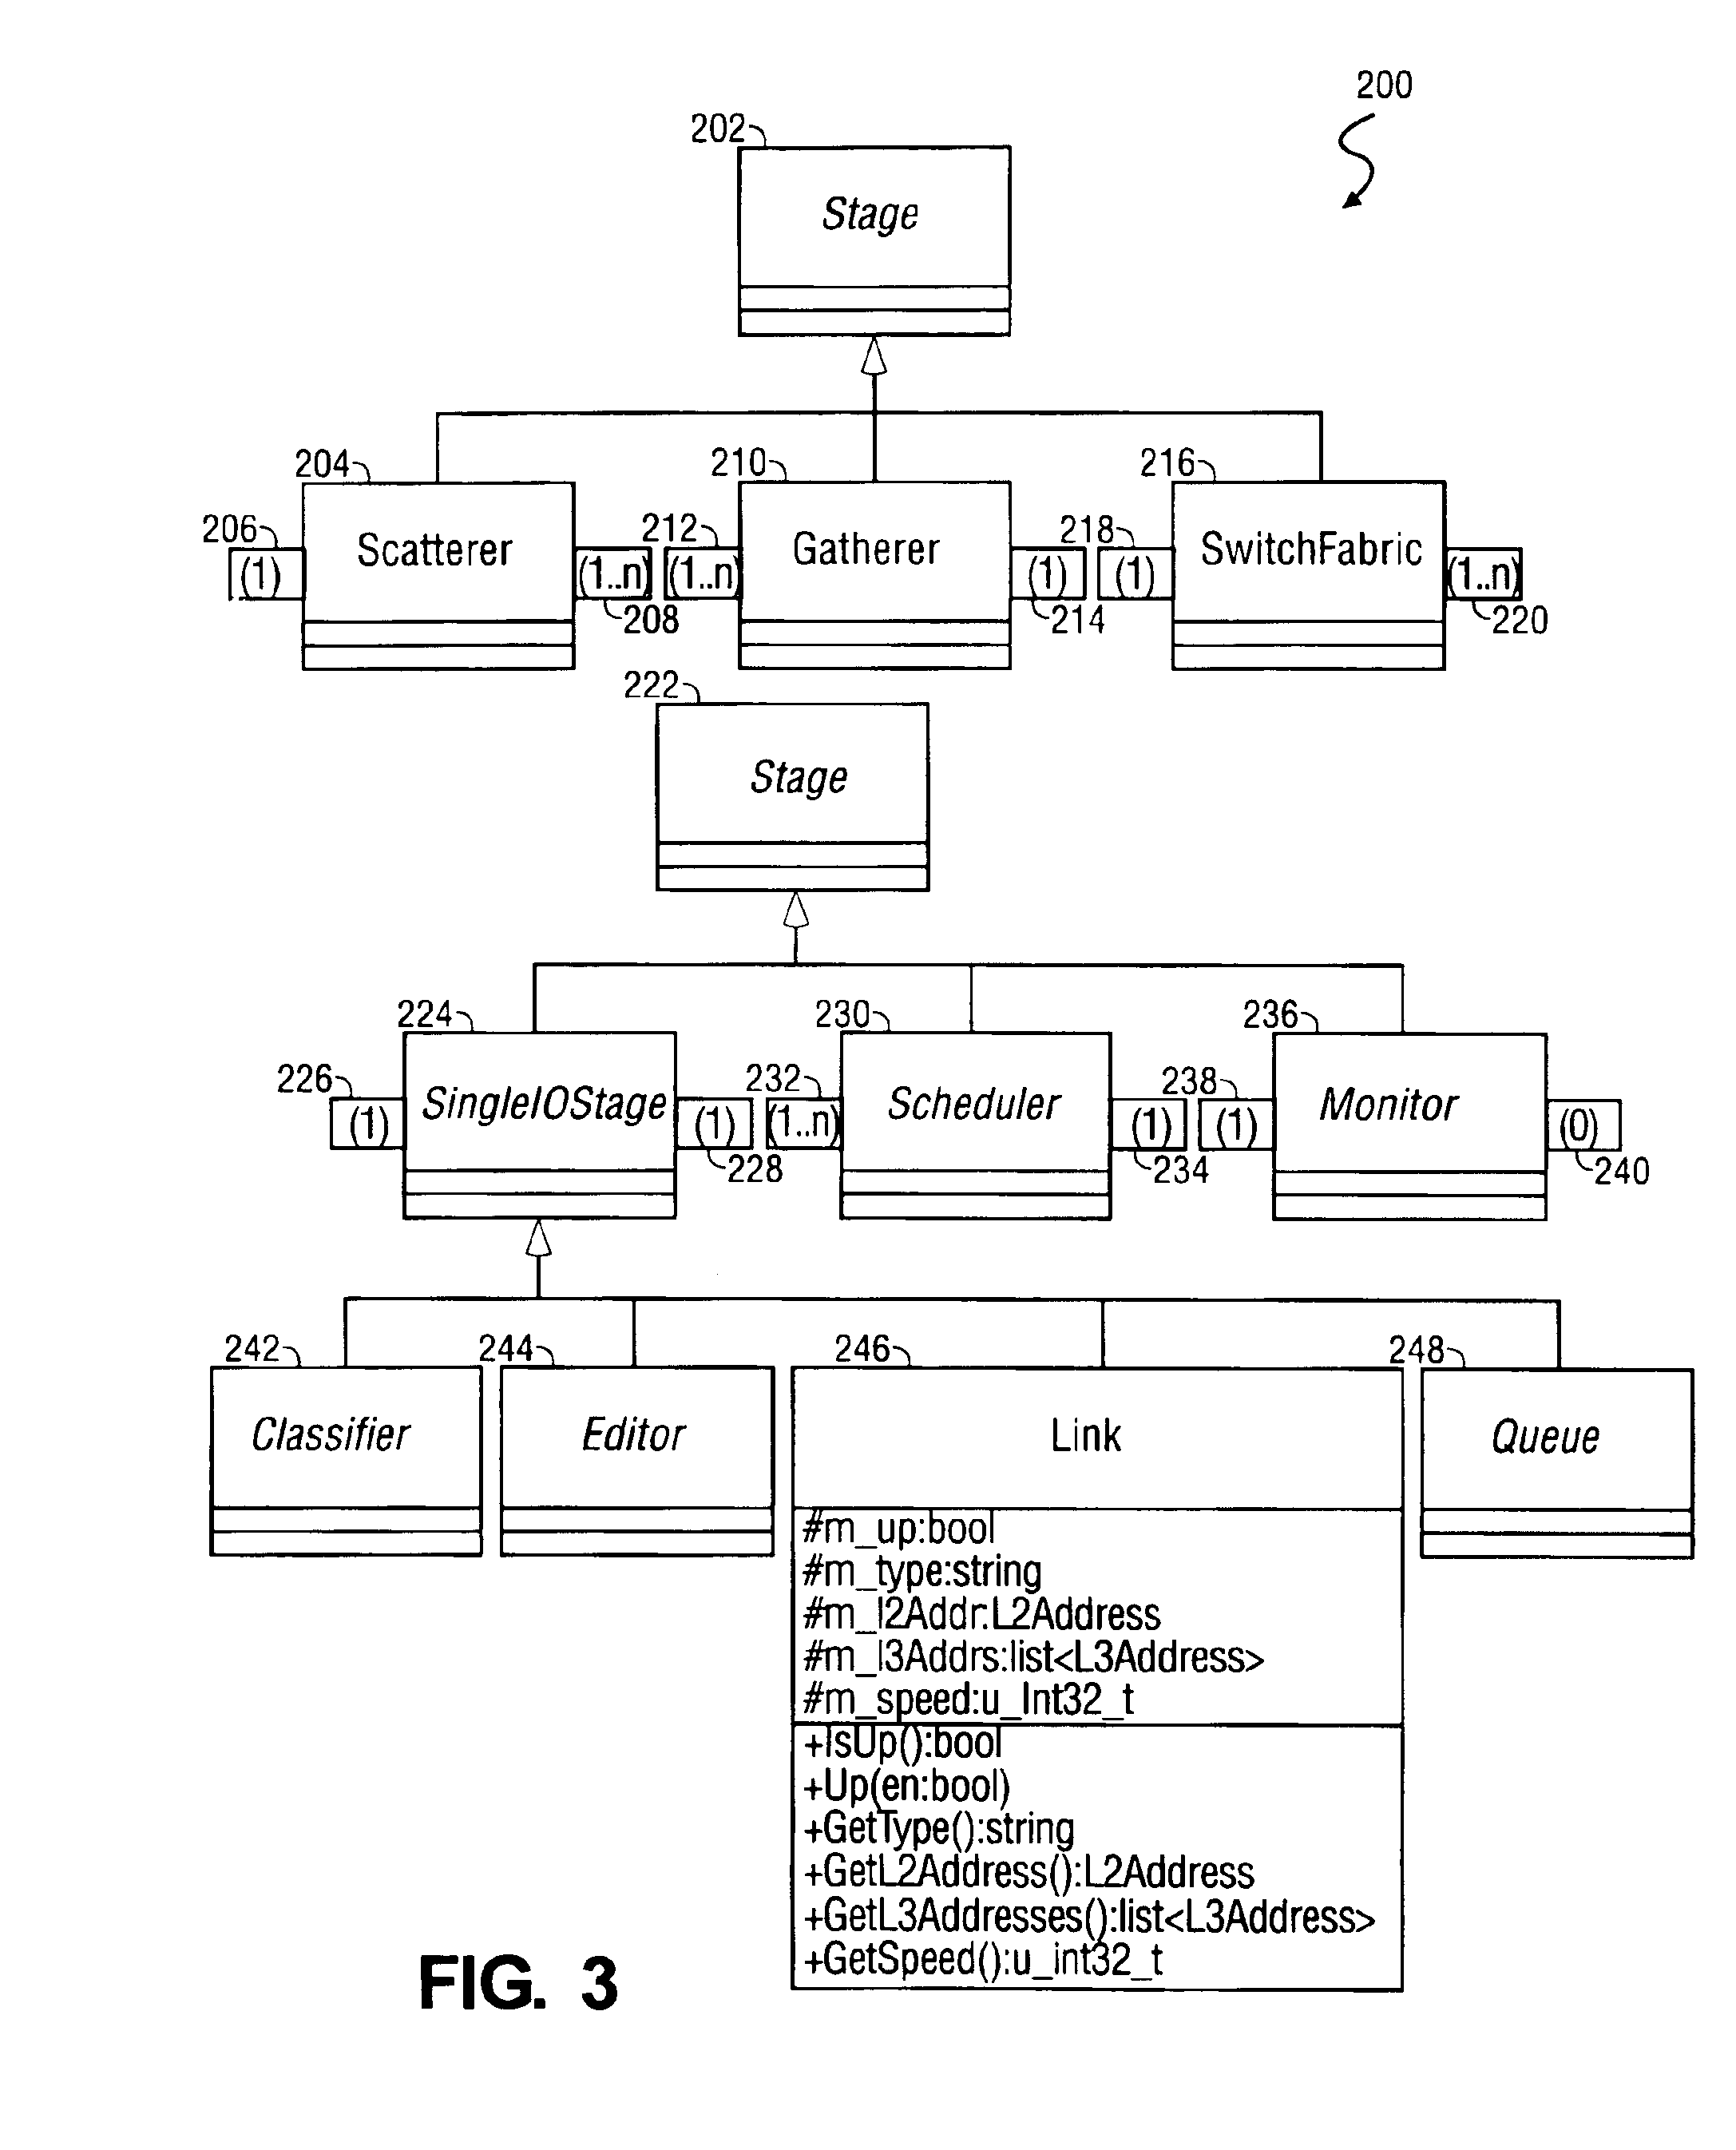 Method for representing and controlling packet data flow through packet forwarding hardware